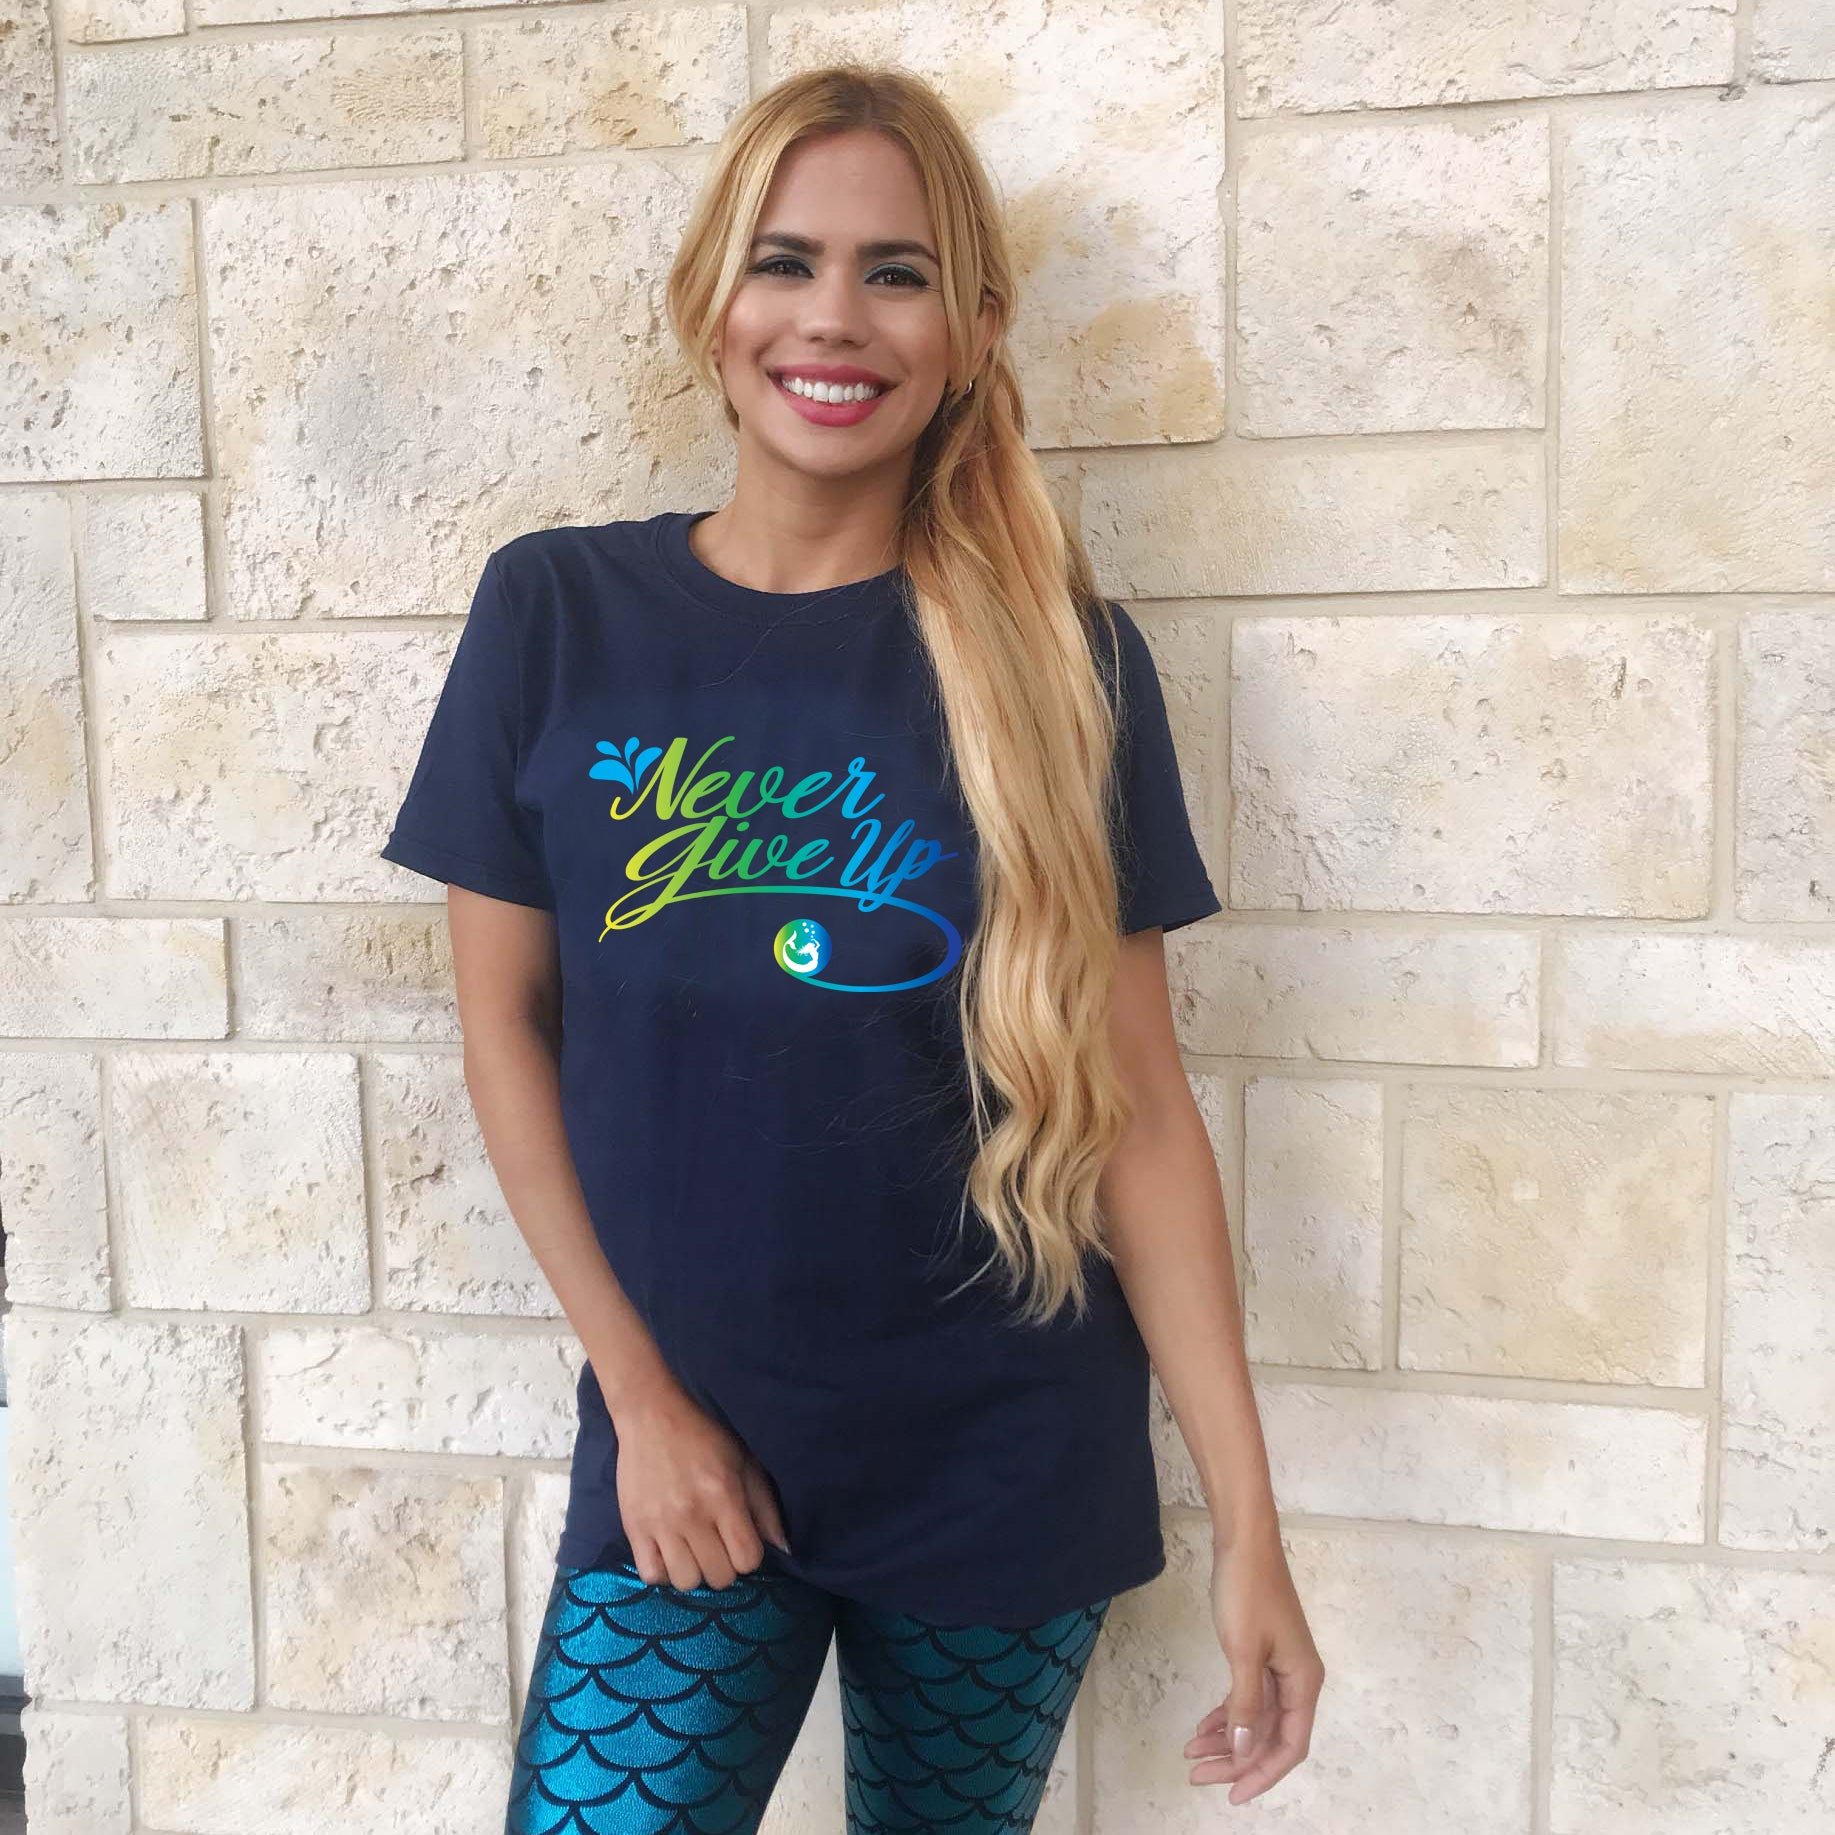 Introducing Mermaid Elle's "Never Give Up" Short-Sleeve Boyfriend Unisex T-Shirt by Cape Cali